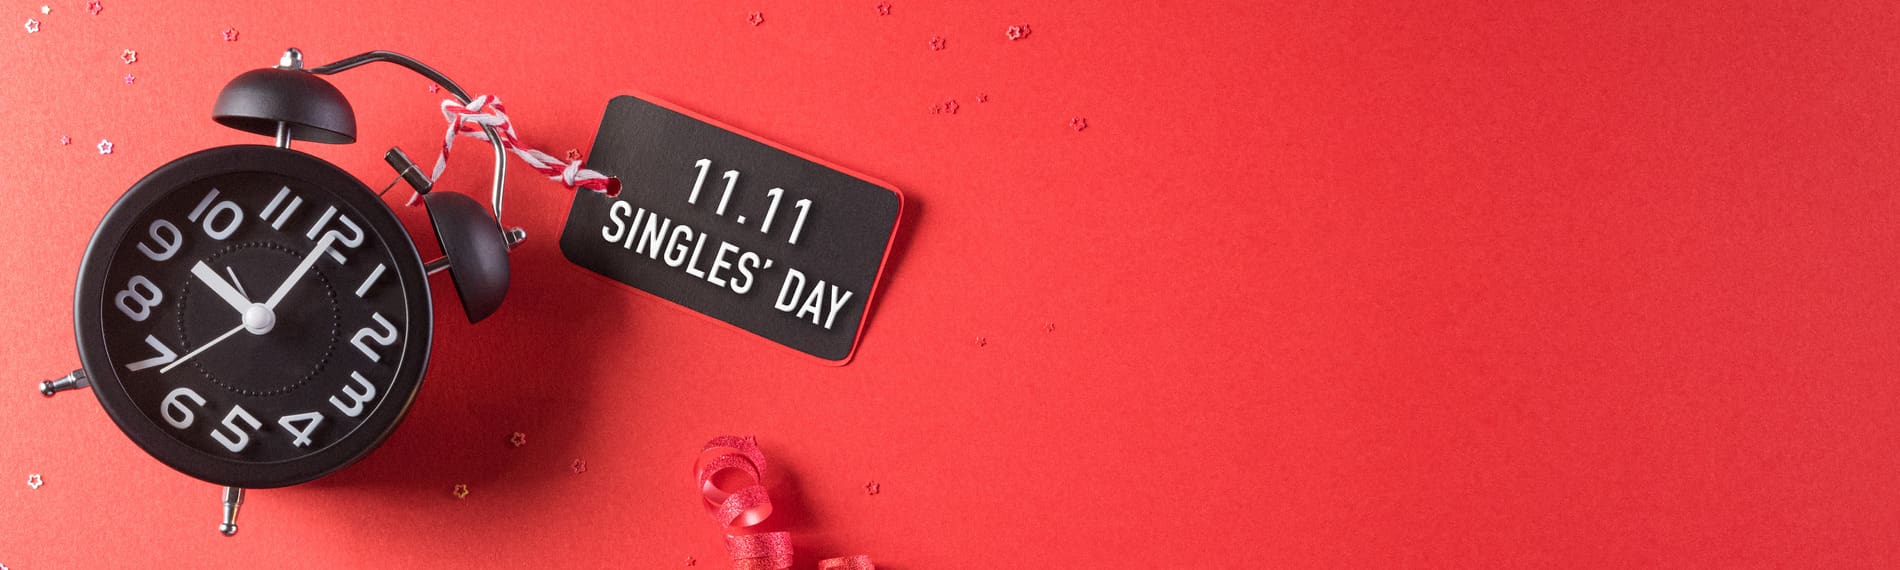 The Impact of Chinese Singles Day on Retail